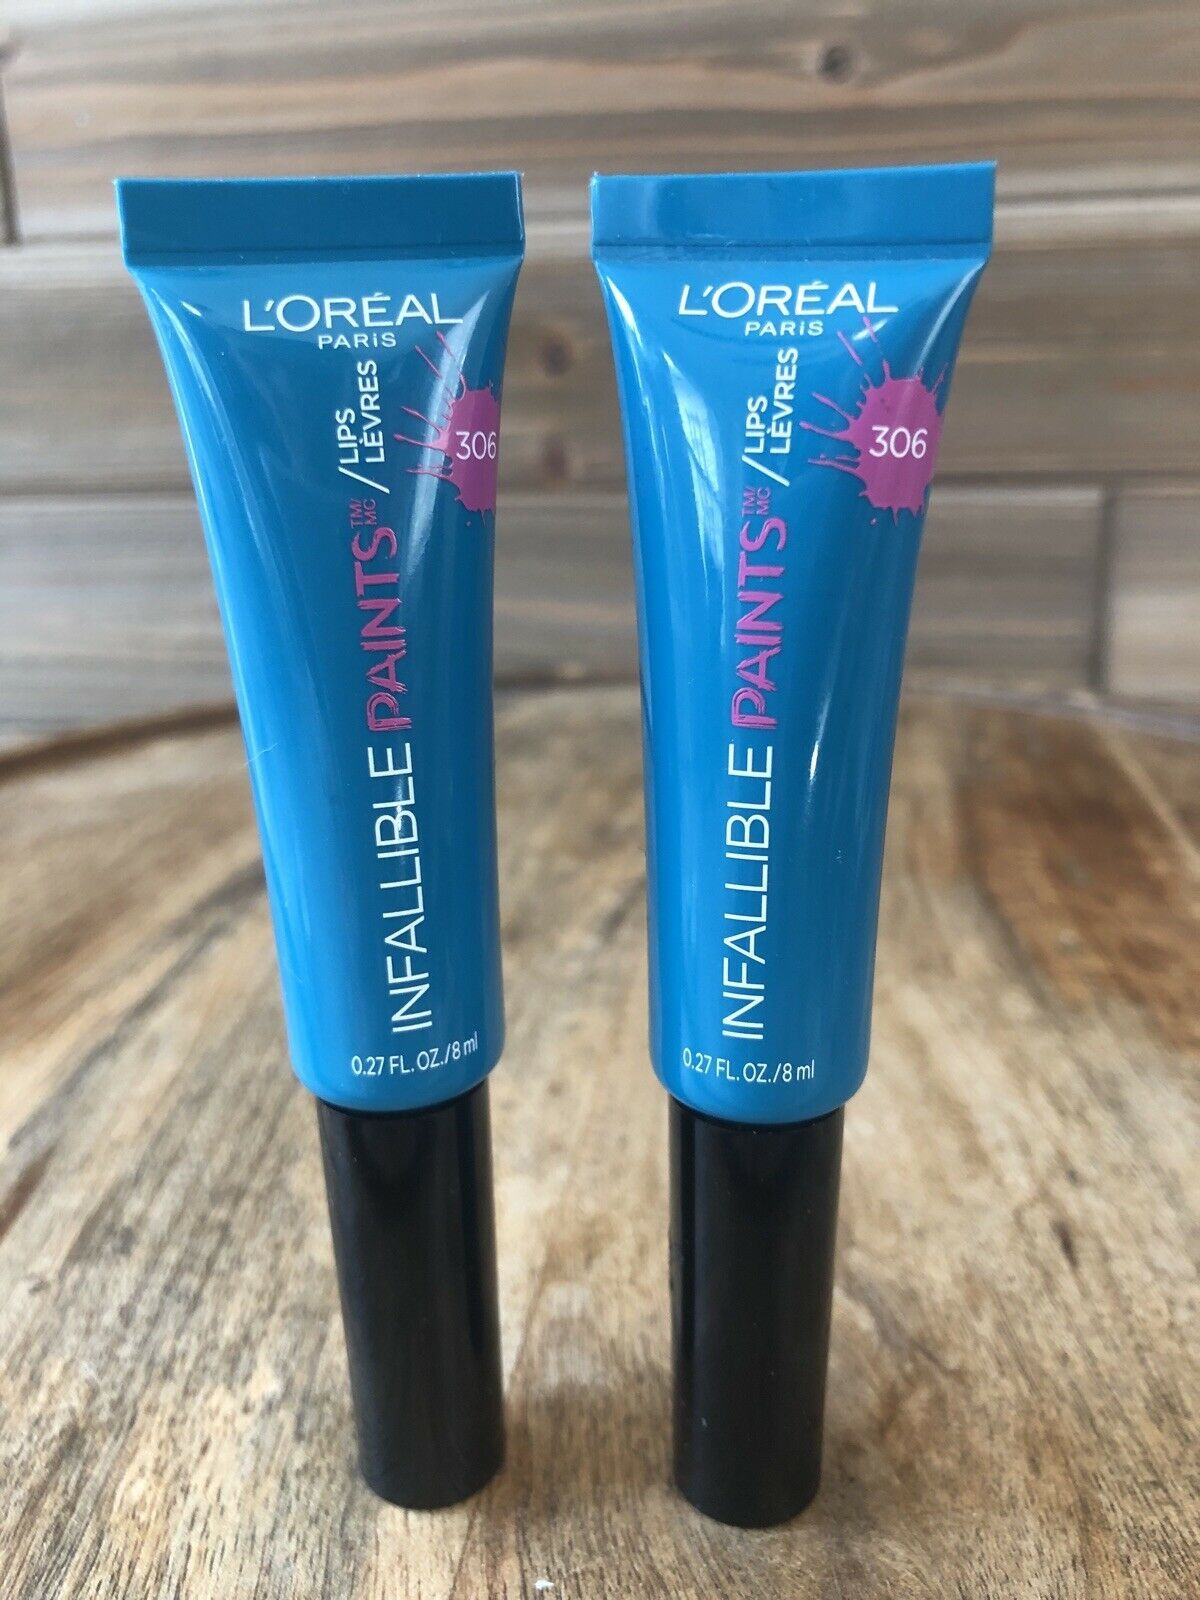 Primary image for (2) L'Oreal Paris Infallible Paints Lip Color LipStick #306 Domineering Teal